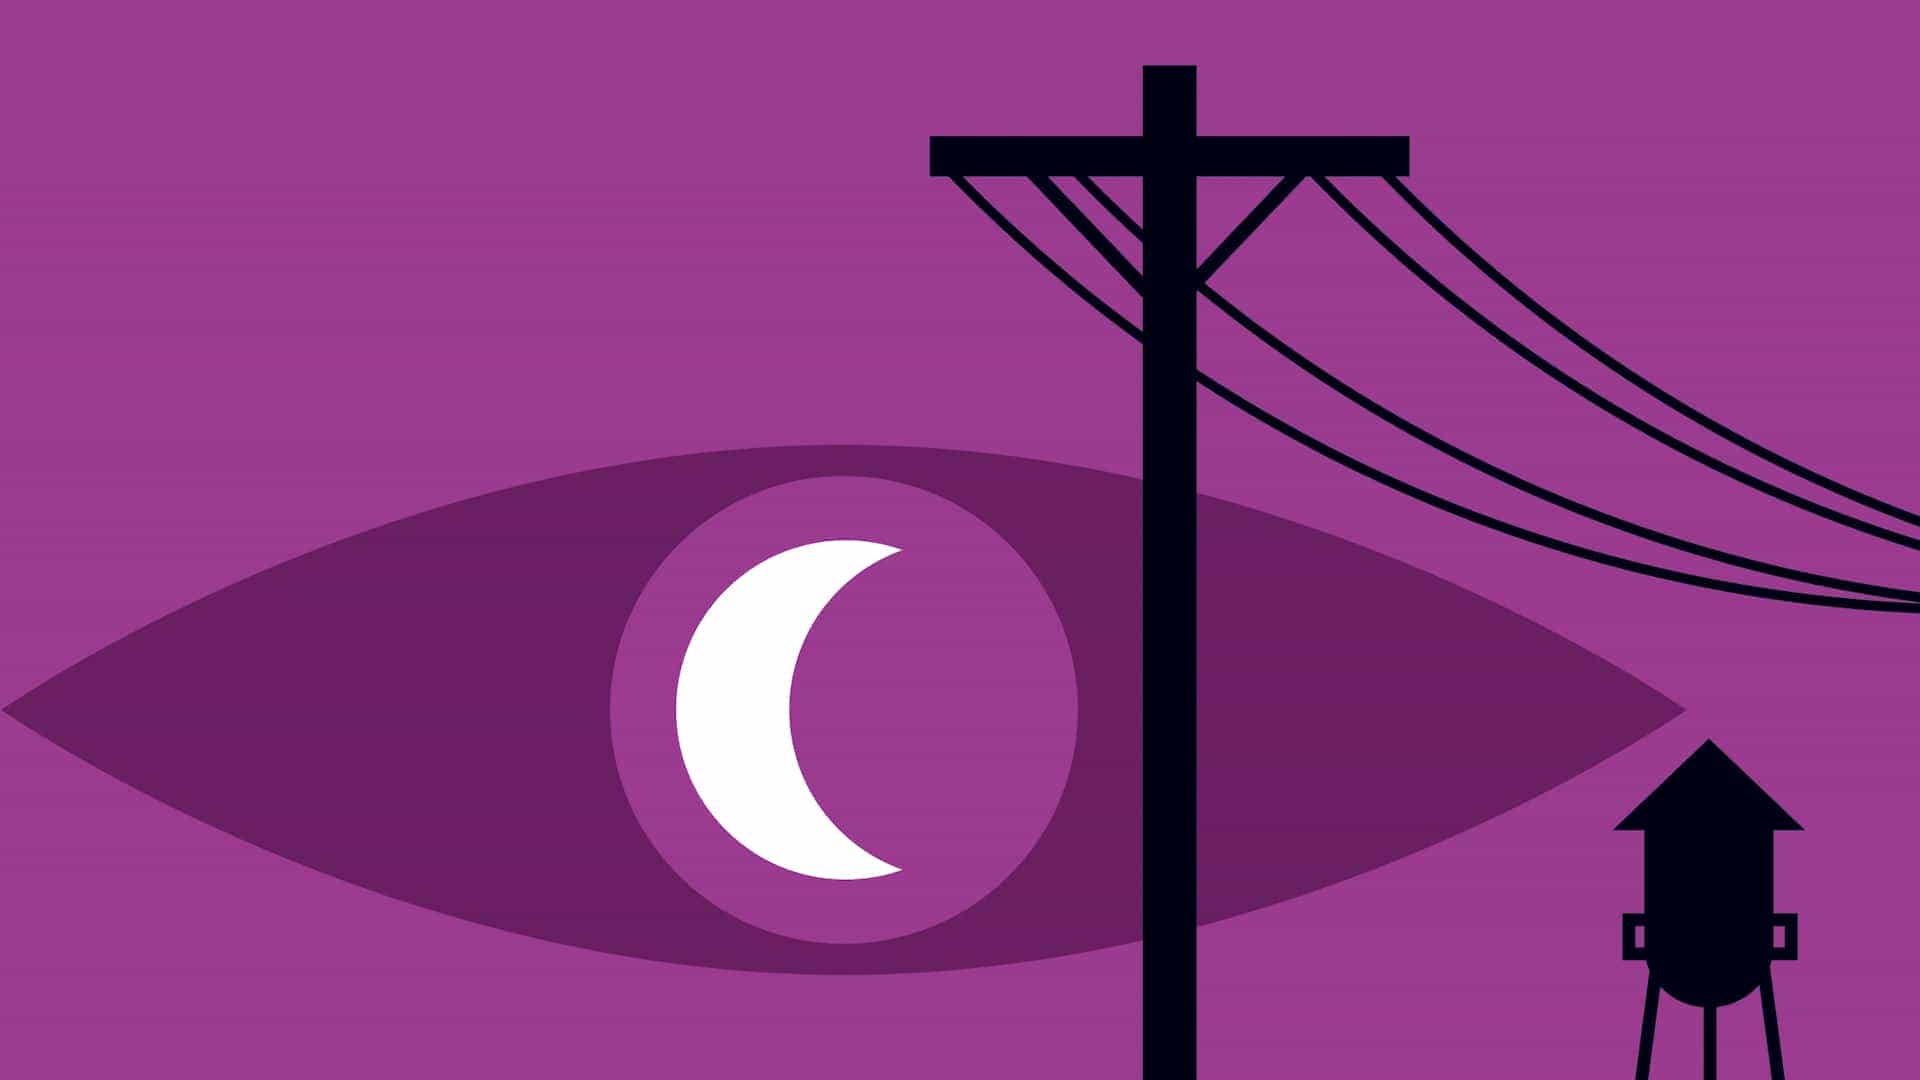 Welcome To Night Vale: The Haunting of Night Vale